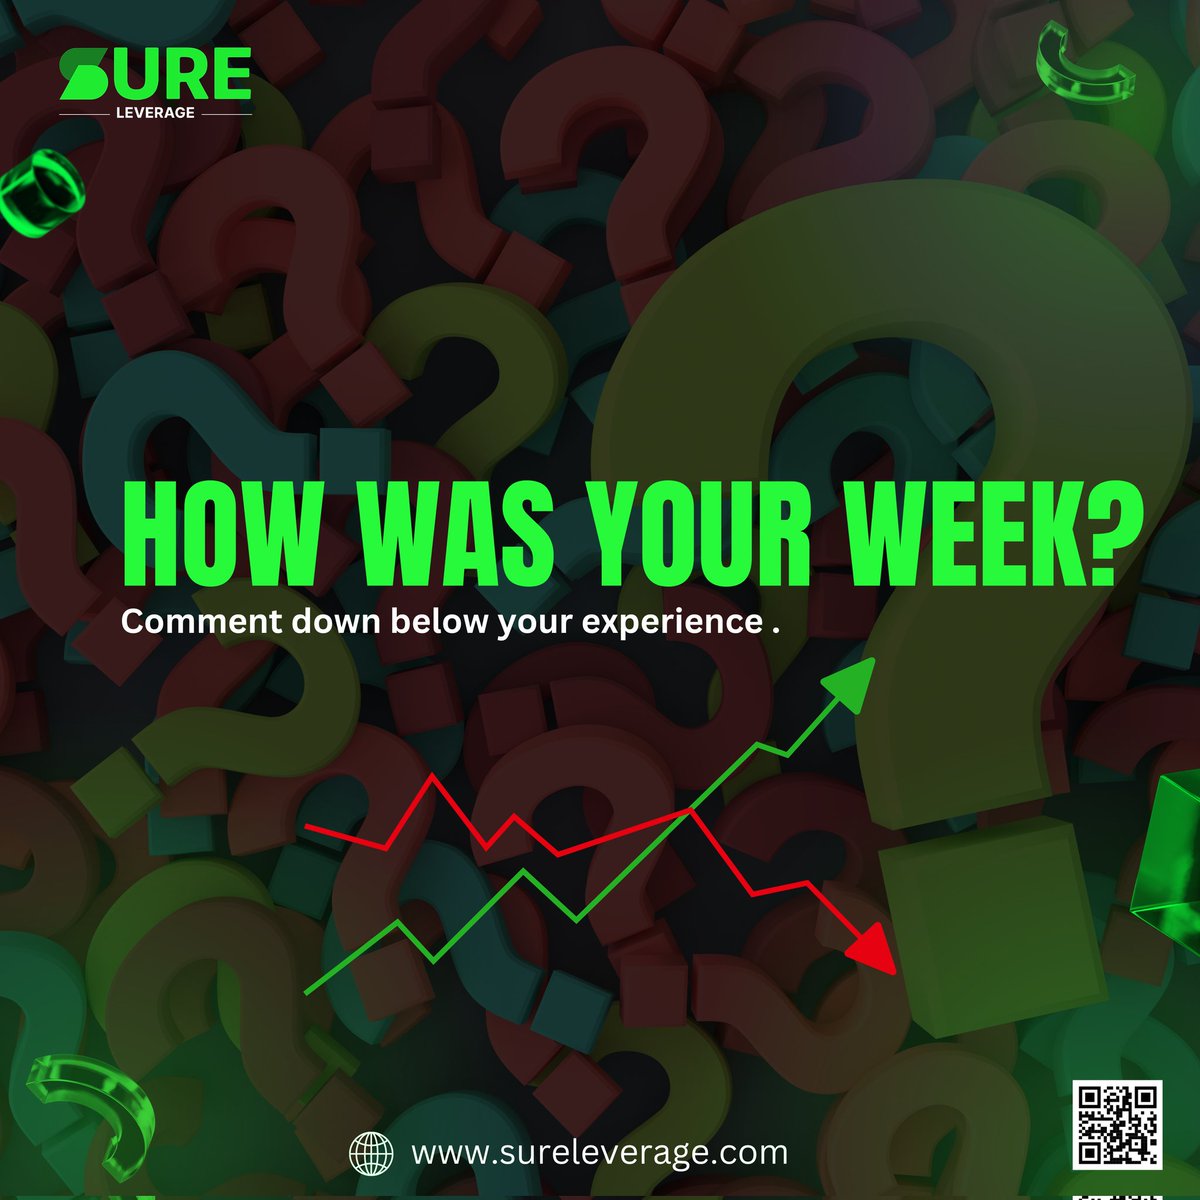 HOW WAS YOUR WEEK?

Comment down below your experience.

🚀 Sign up and get 20% off + 125% refund
📌CODE Refund125

💪 For more information visit 
SureLeverage.com

#trading #smc #propfirmtrader #instagramreels  #christmascountdown #christmas #offer  #makemoneyonlinenow…